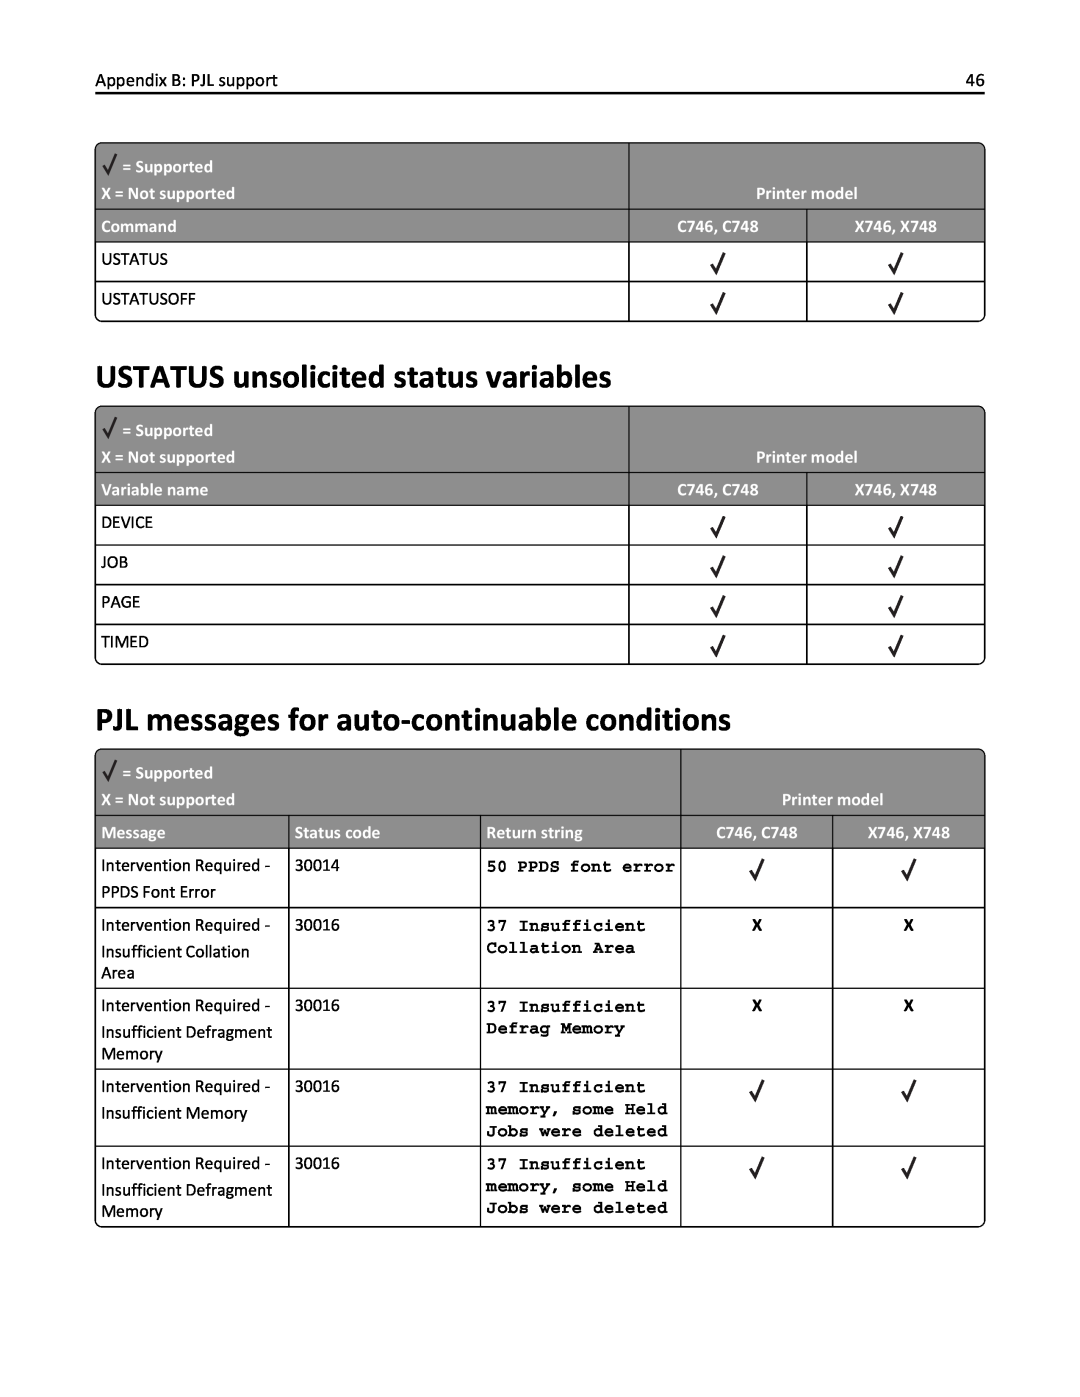 Lexmark 746n USTATUS unsolicited status variables, PJL messages for auto-continuableconditions, Appendix B: PJL support 